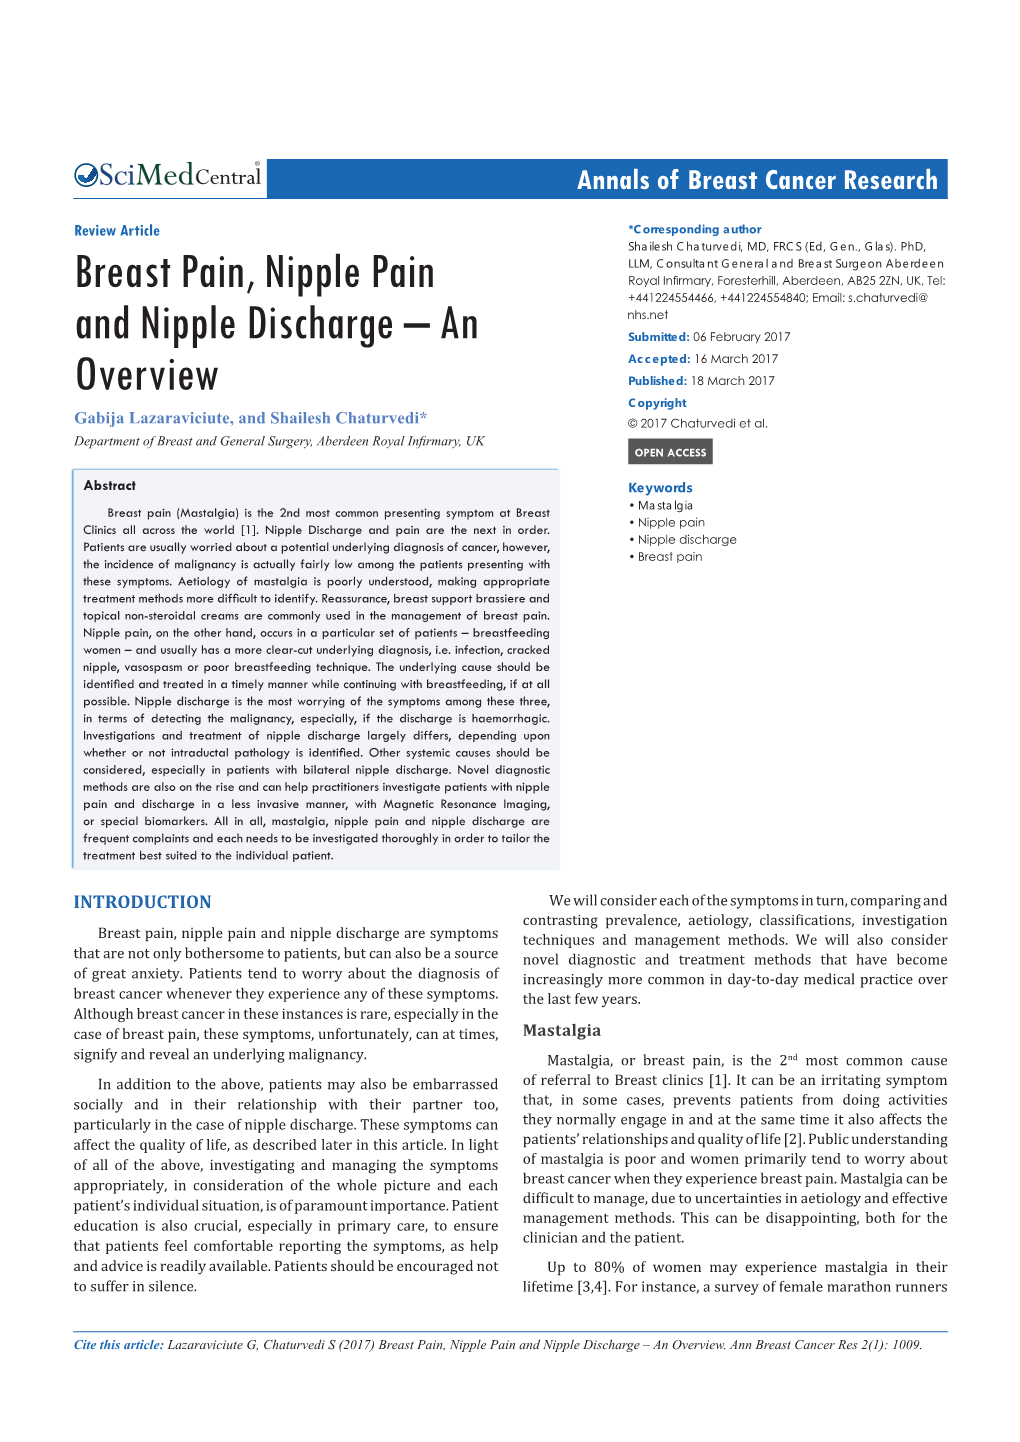 Breast Pain, Nipple Pain and Nipple Discharge Are Symptoms Techniques and Management Methods